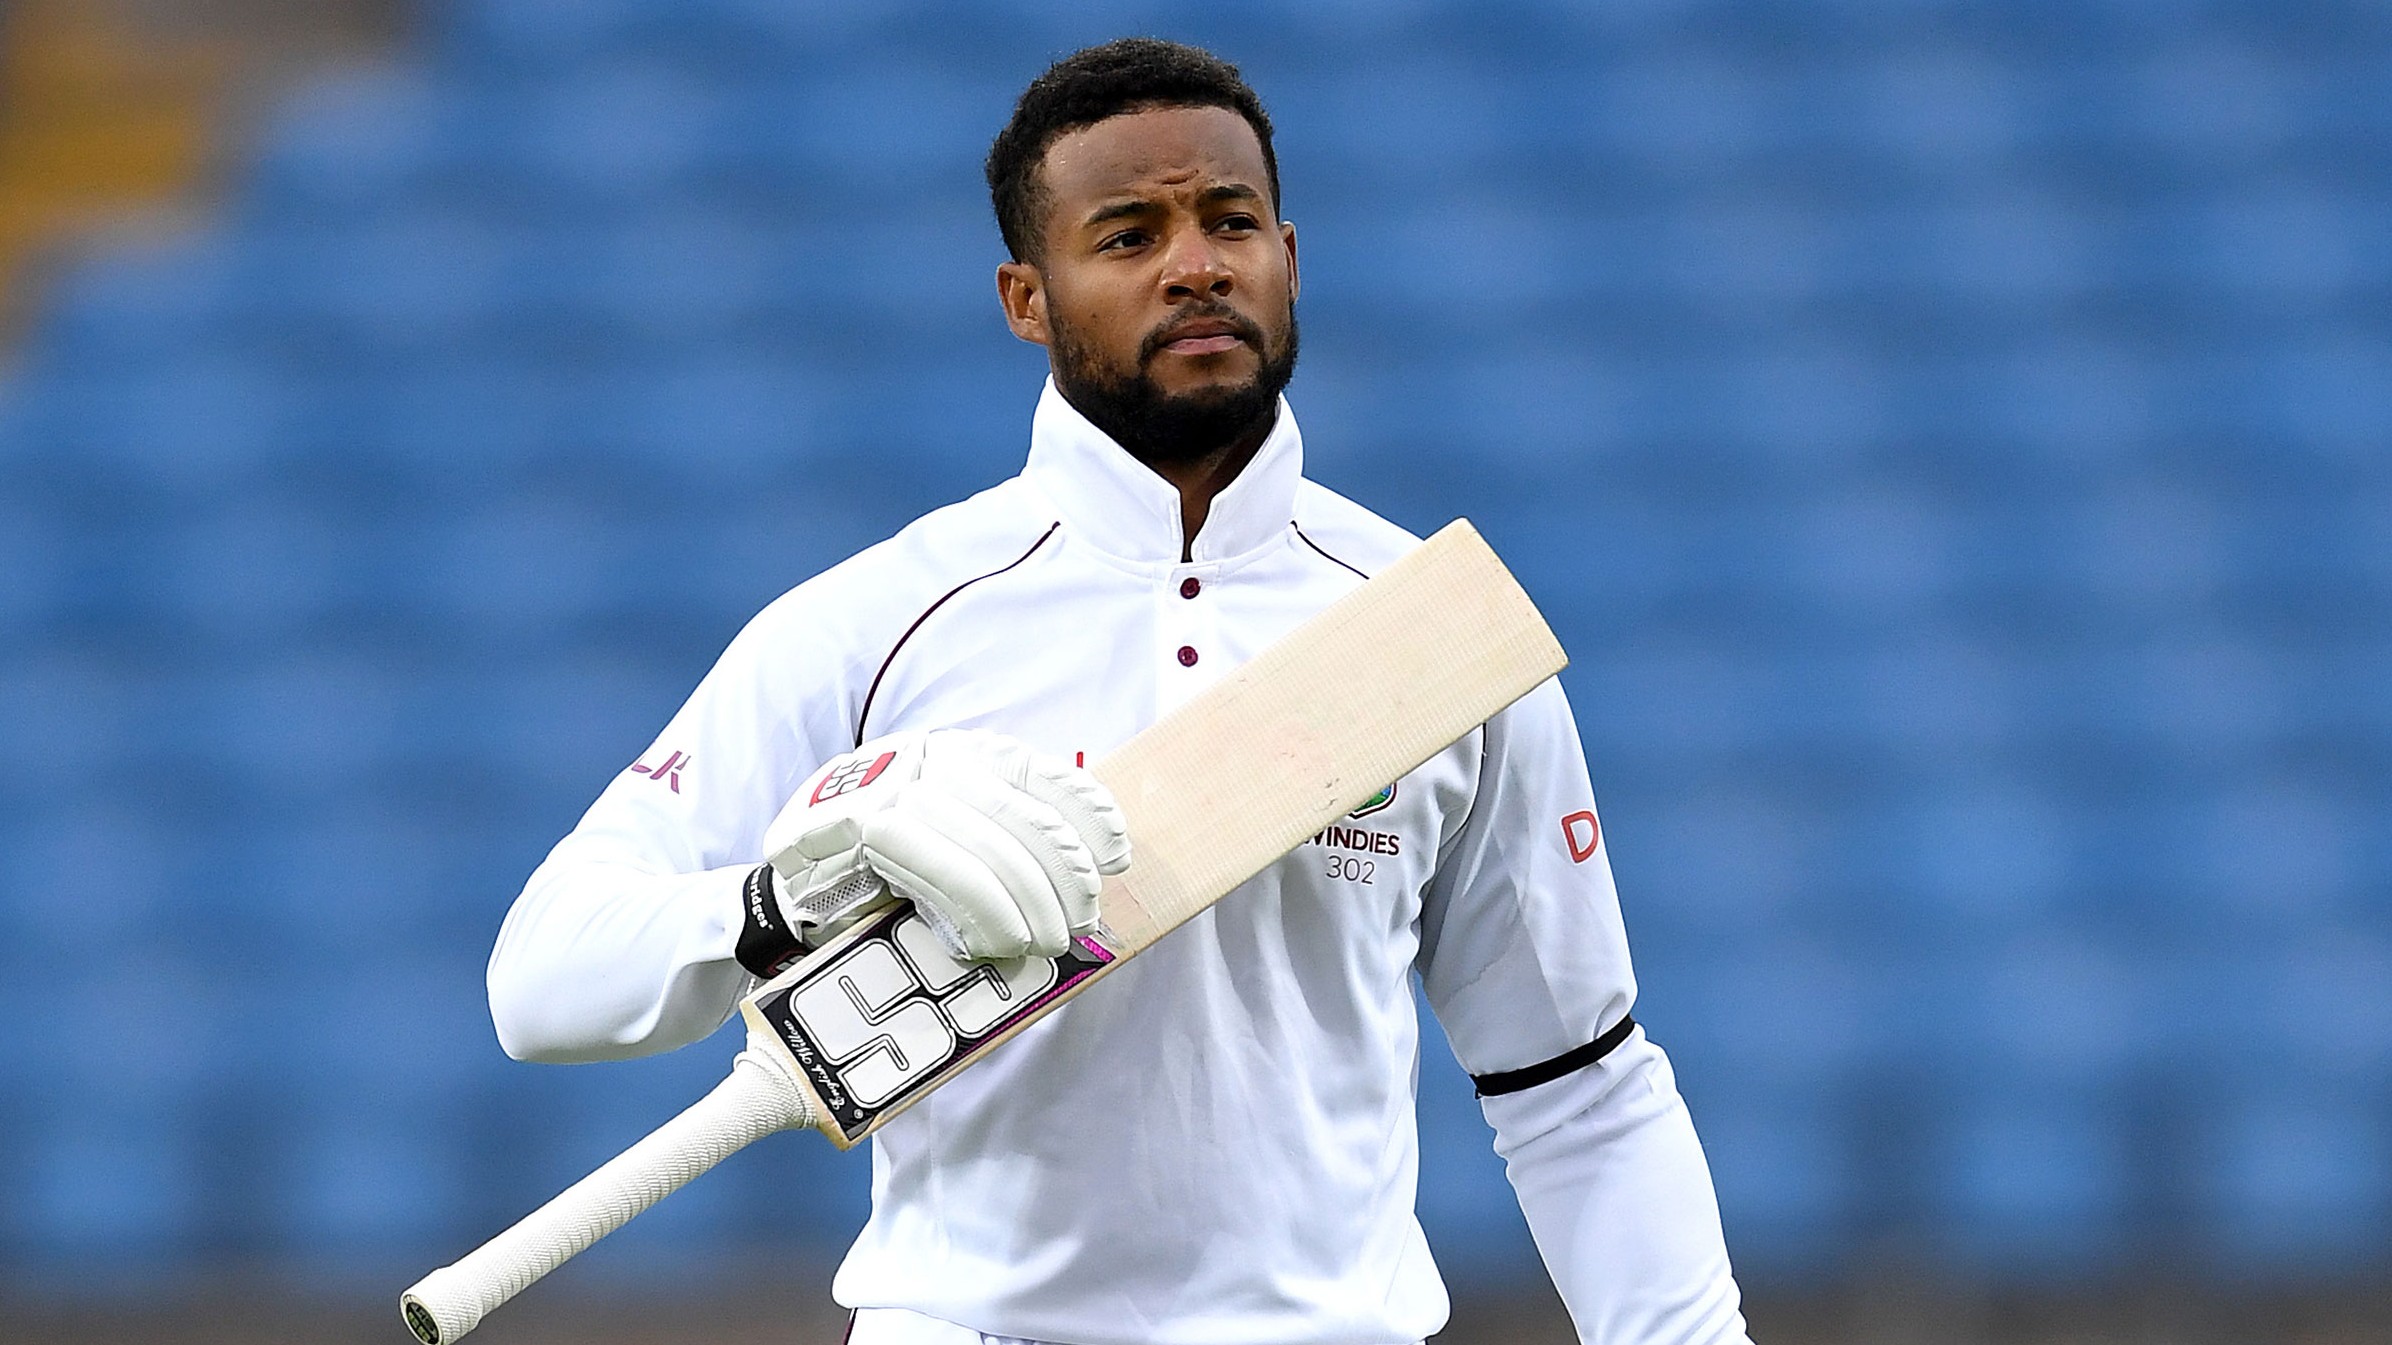 ENG v WI 2020: West Indies' Shai Hope aims to boost Test record in upcoming England series